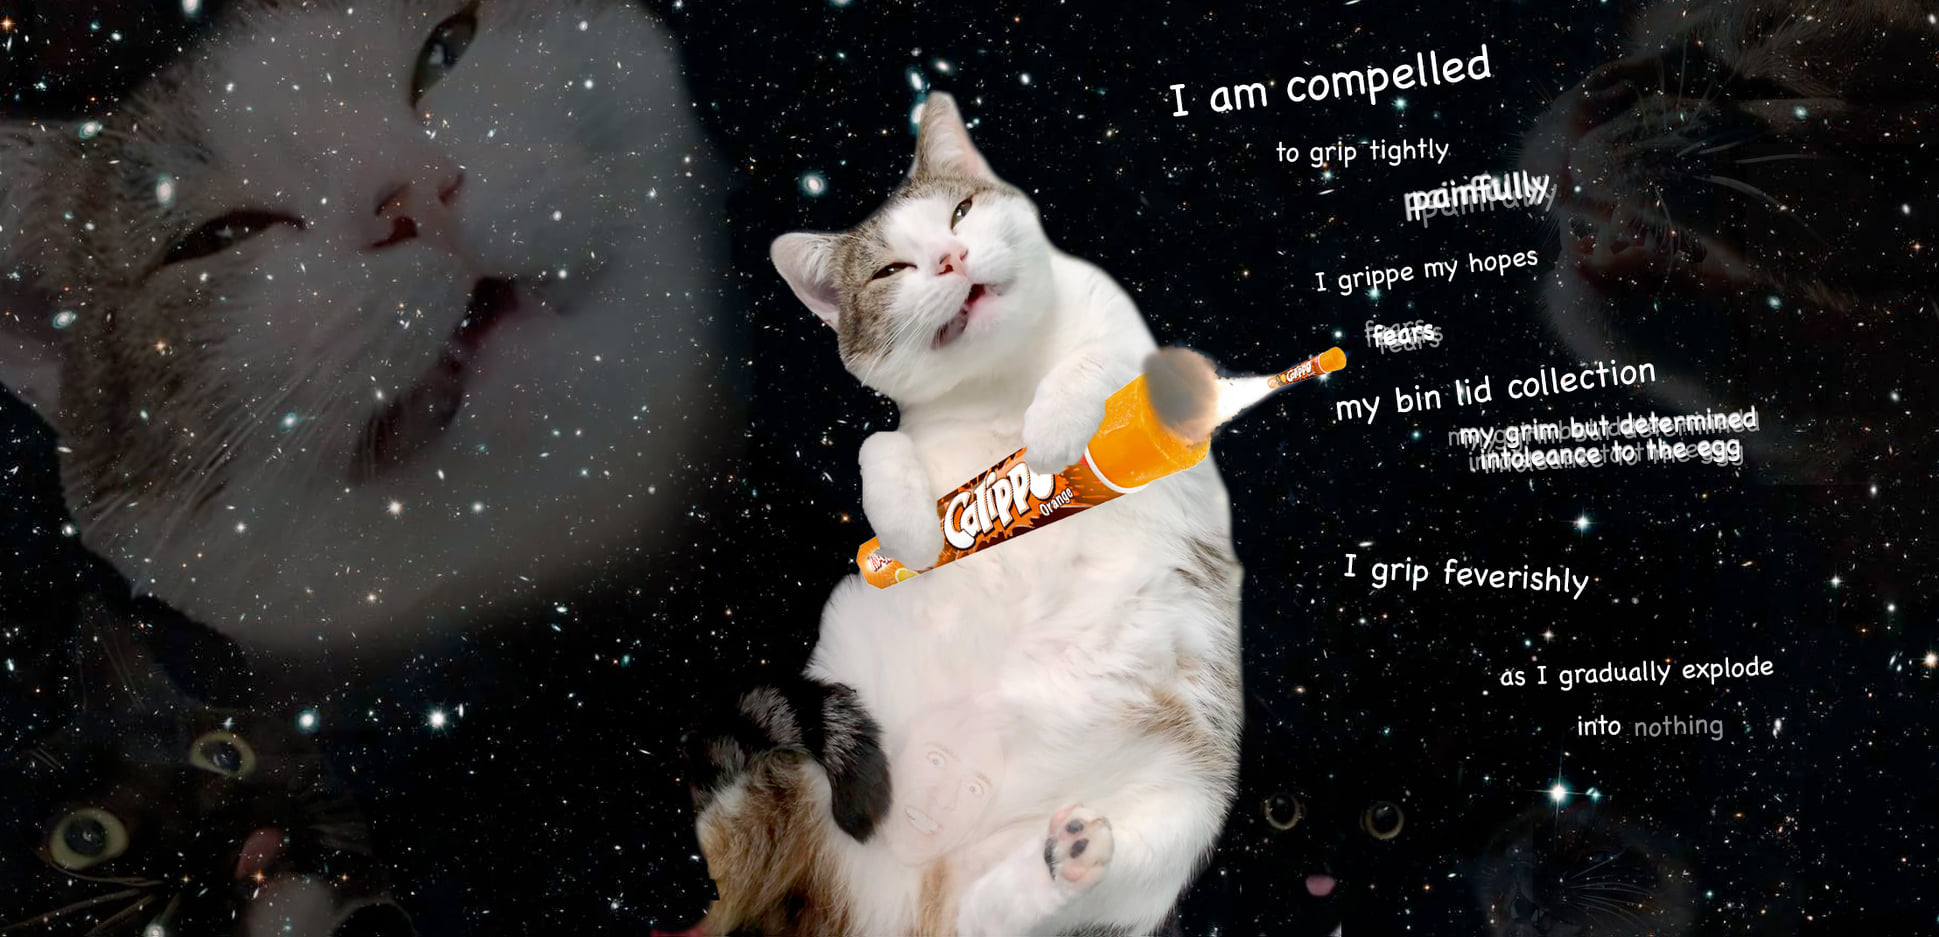 Grimacing cat floats through space holding a calippo which is firing a smaller calippo through the air